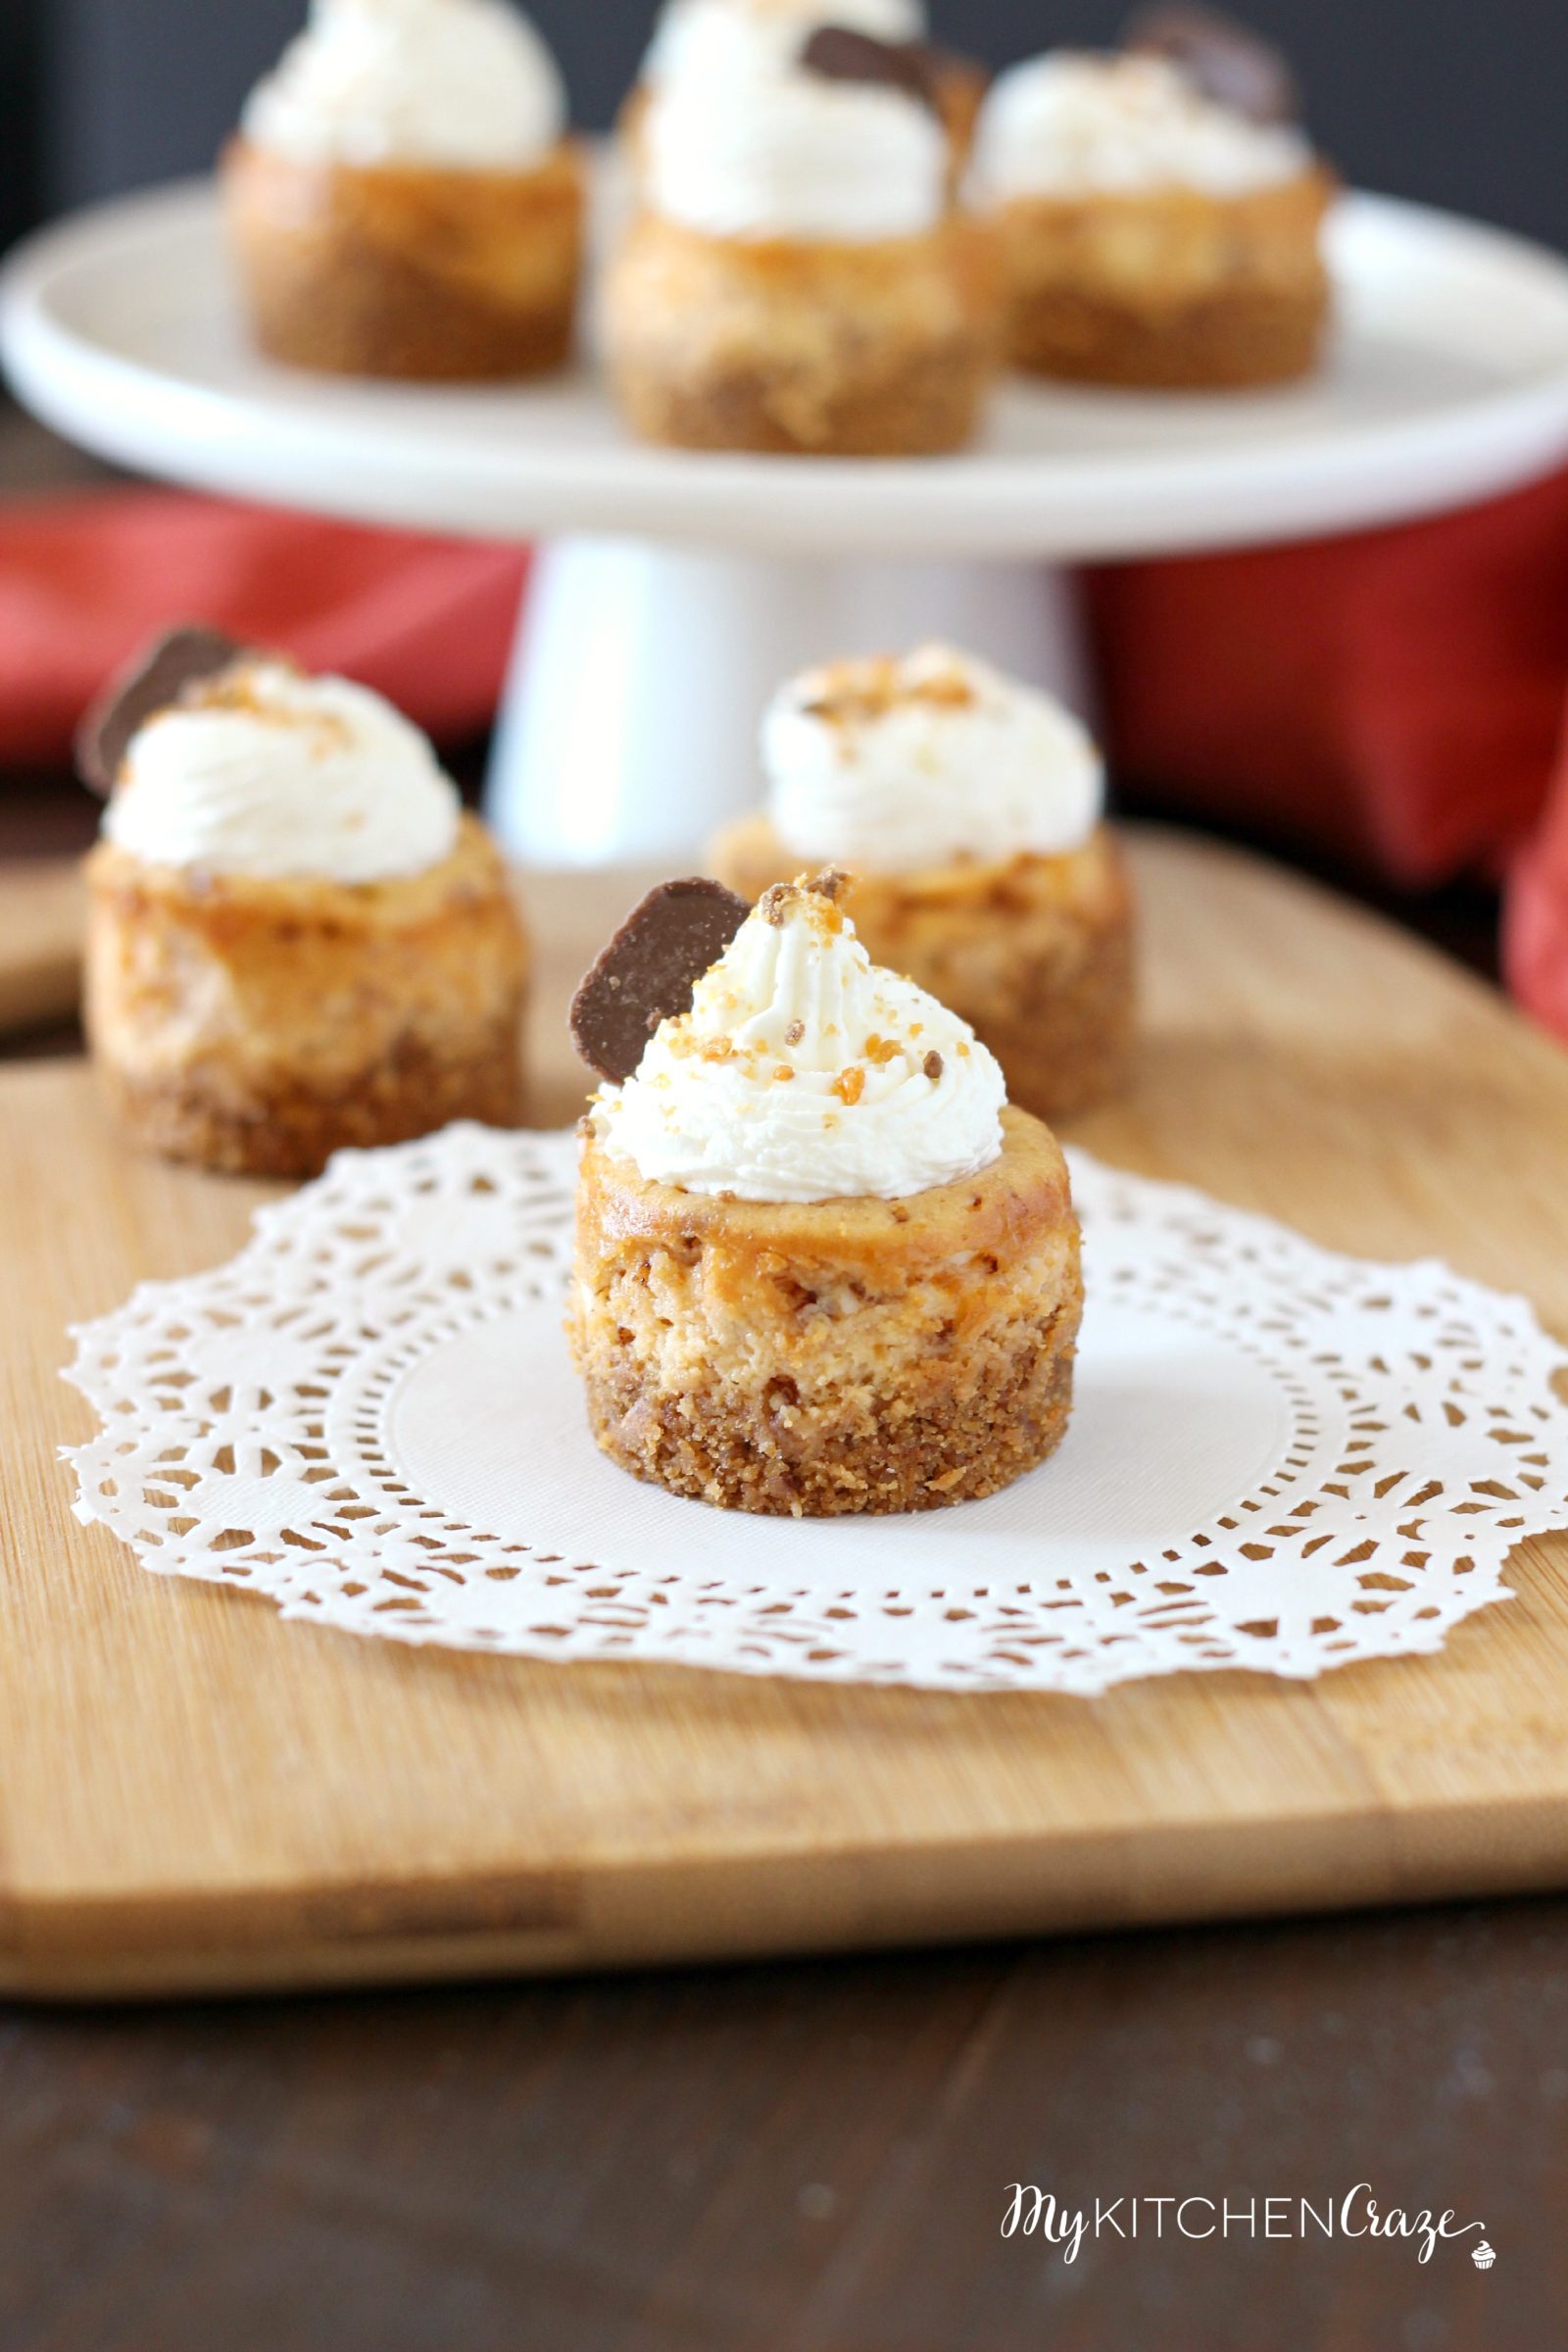 Mini Butterfinger Cheesecakes ~ mykitchencraze.com ~ Delicious cheesecakes swirled with butterfingers candies and topped with whipped cream! Yum!